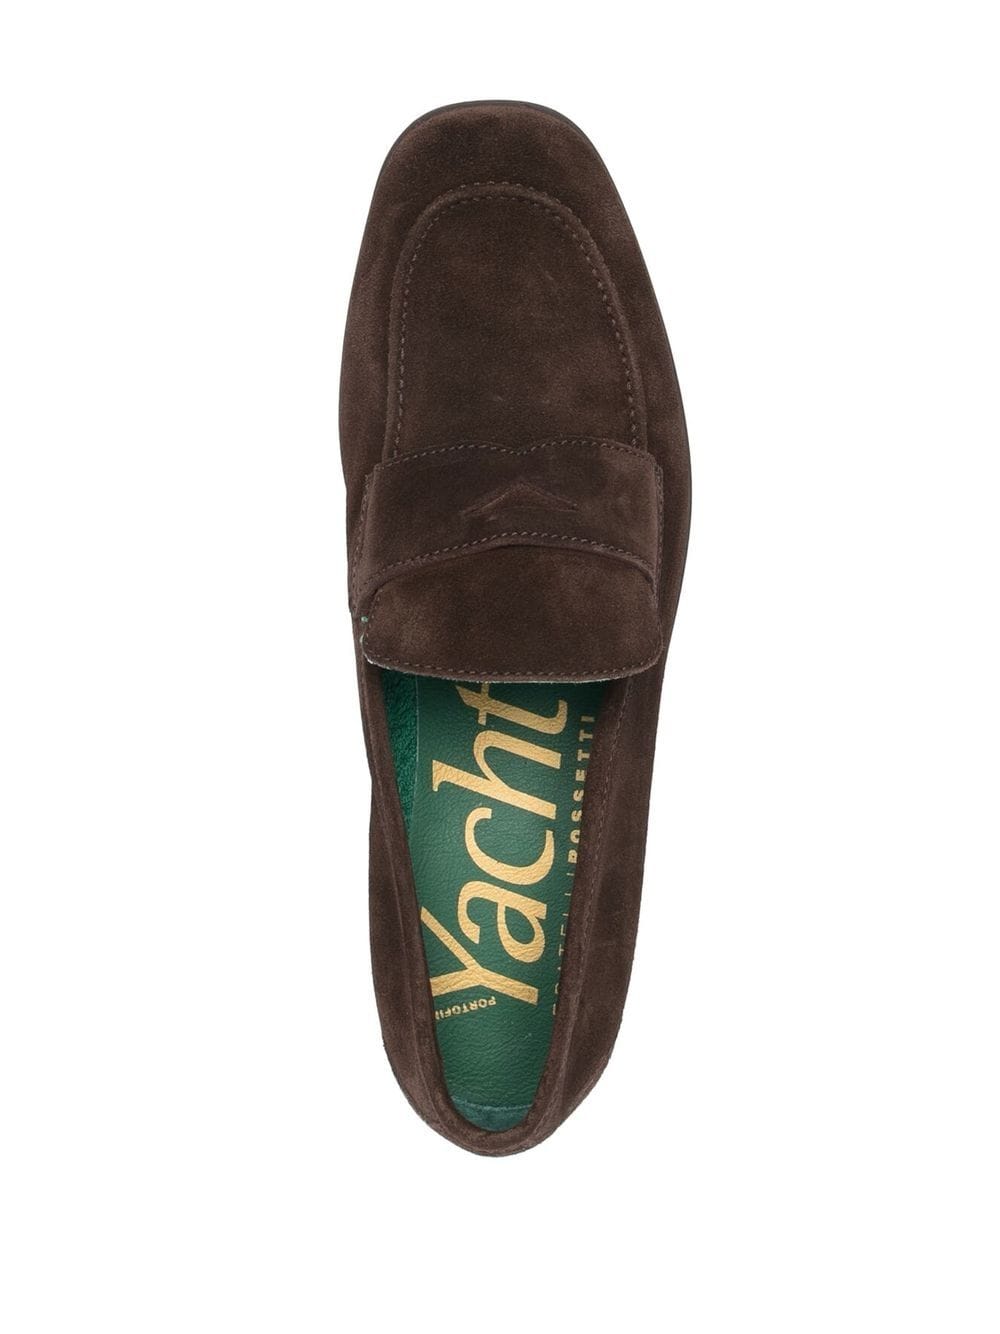 Shop Fratelli Rossetti Slip-on Suede Penny Loafers In Brown